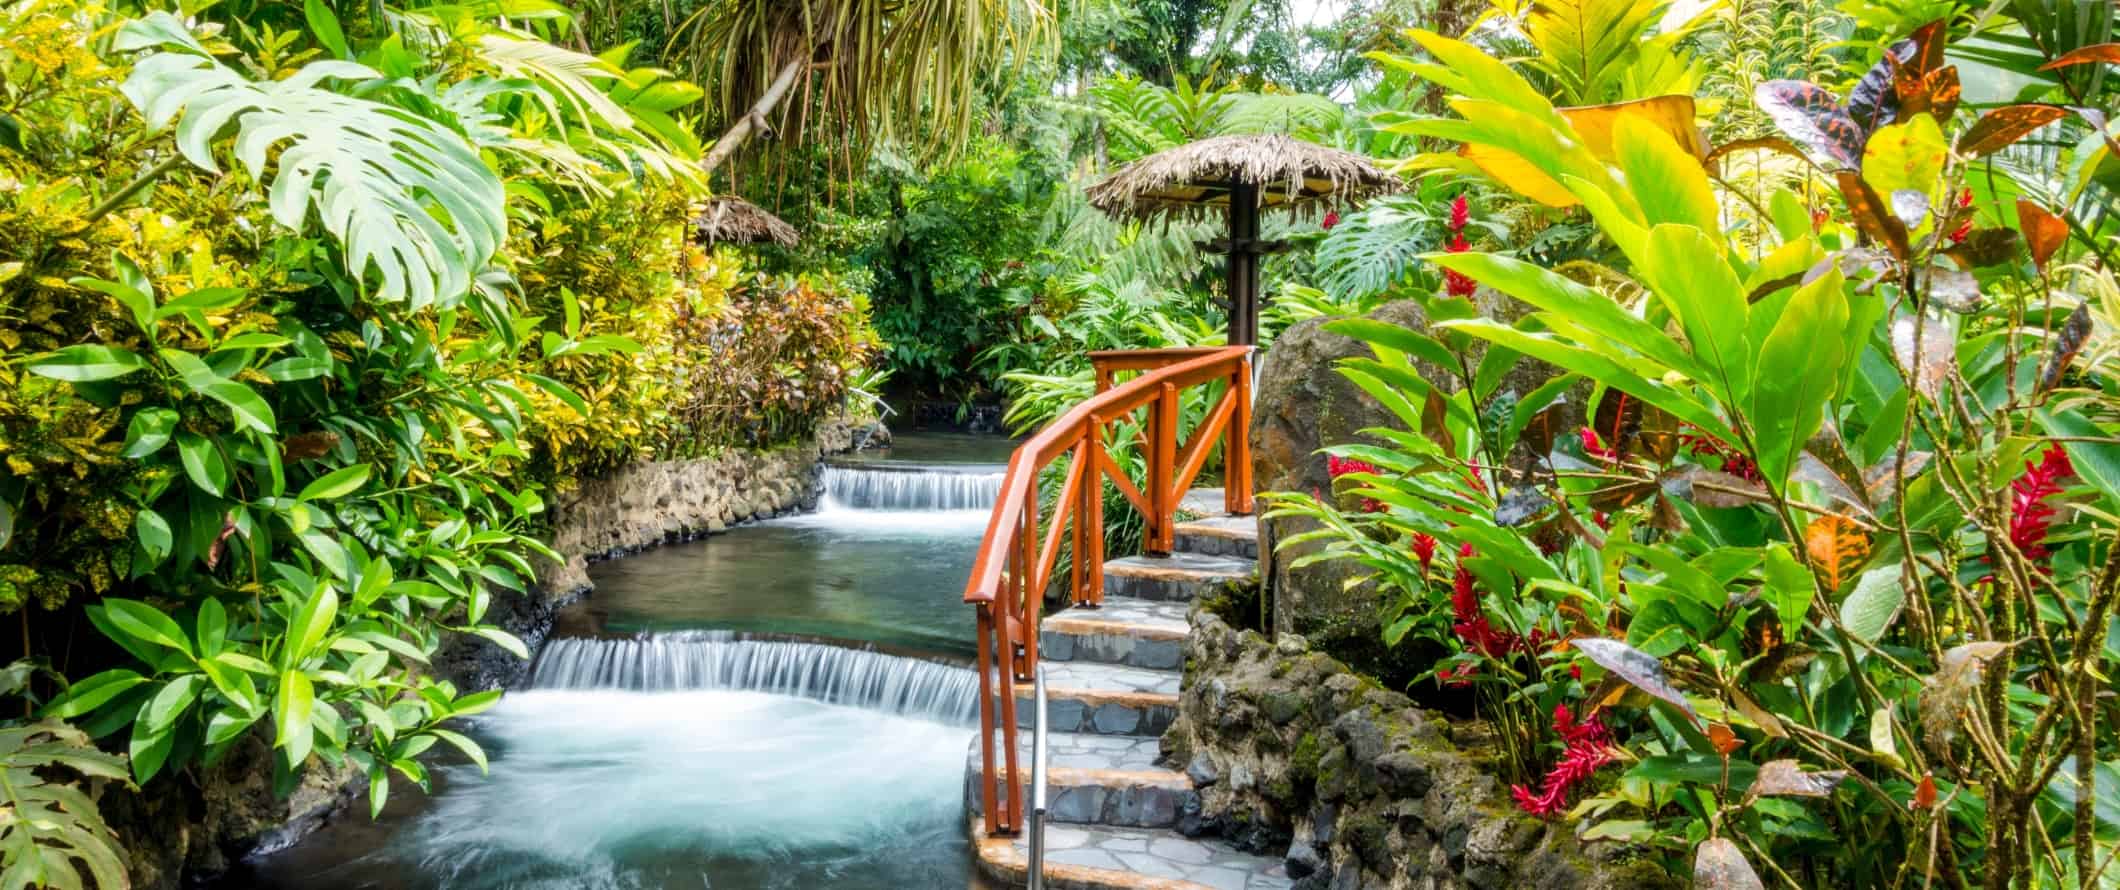 A river flowing through the rainforest at the Tabacón Resort hot springs in Costa Rica